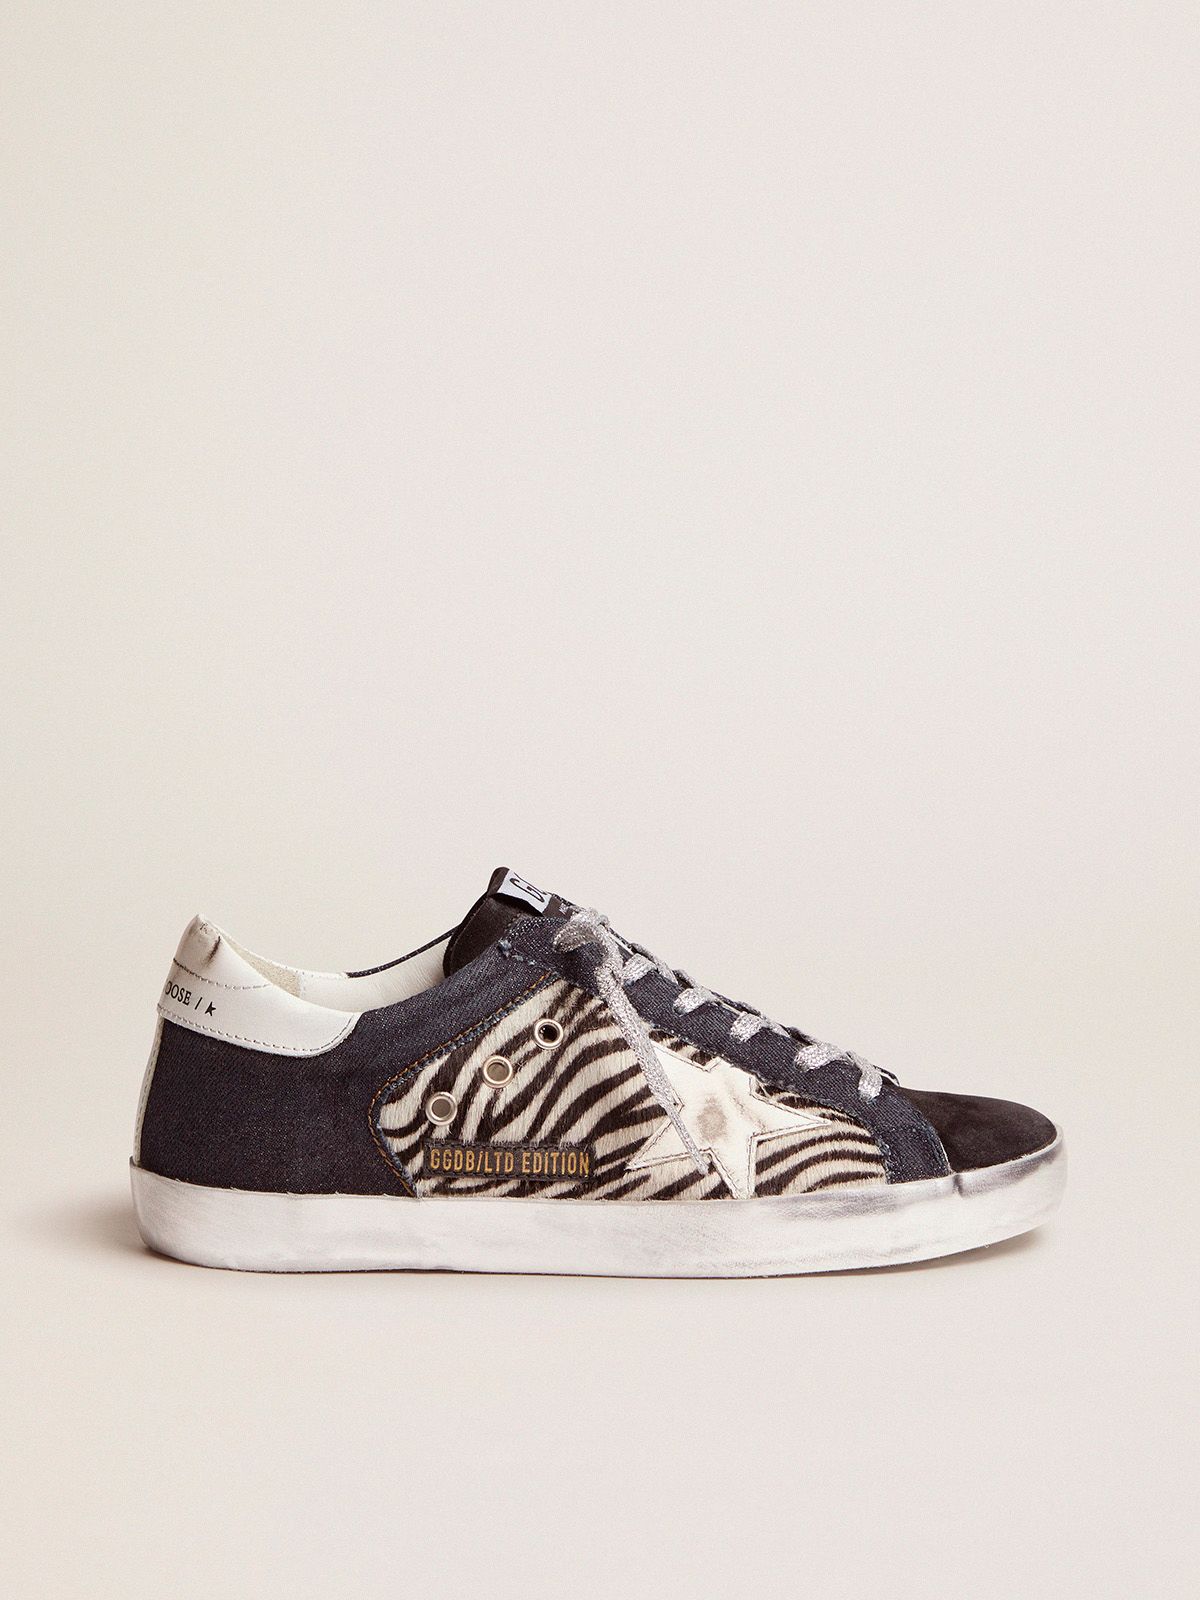 golden goose zebra-print Super-Star denim, pony suede sneakers Limited LAB in skin Edition and